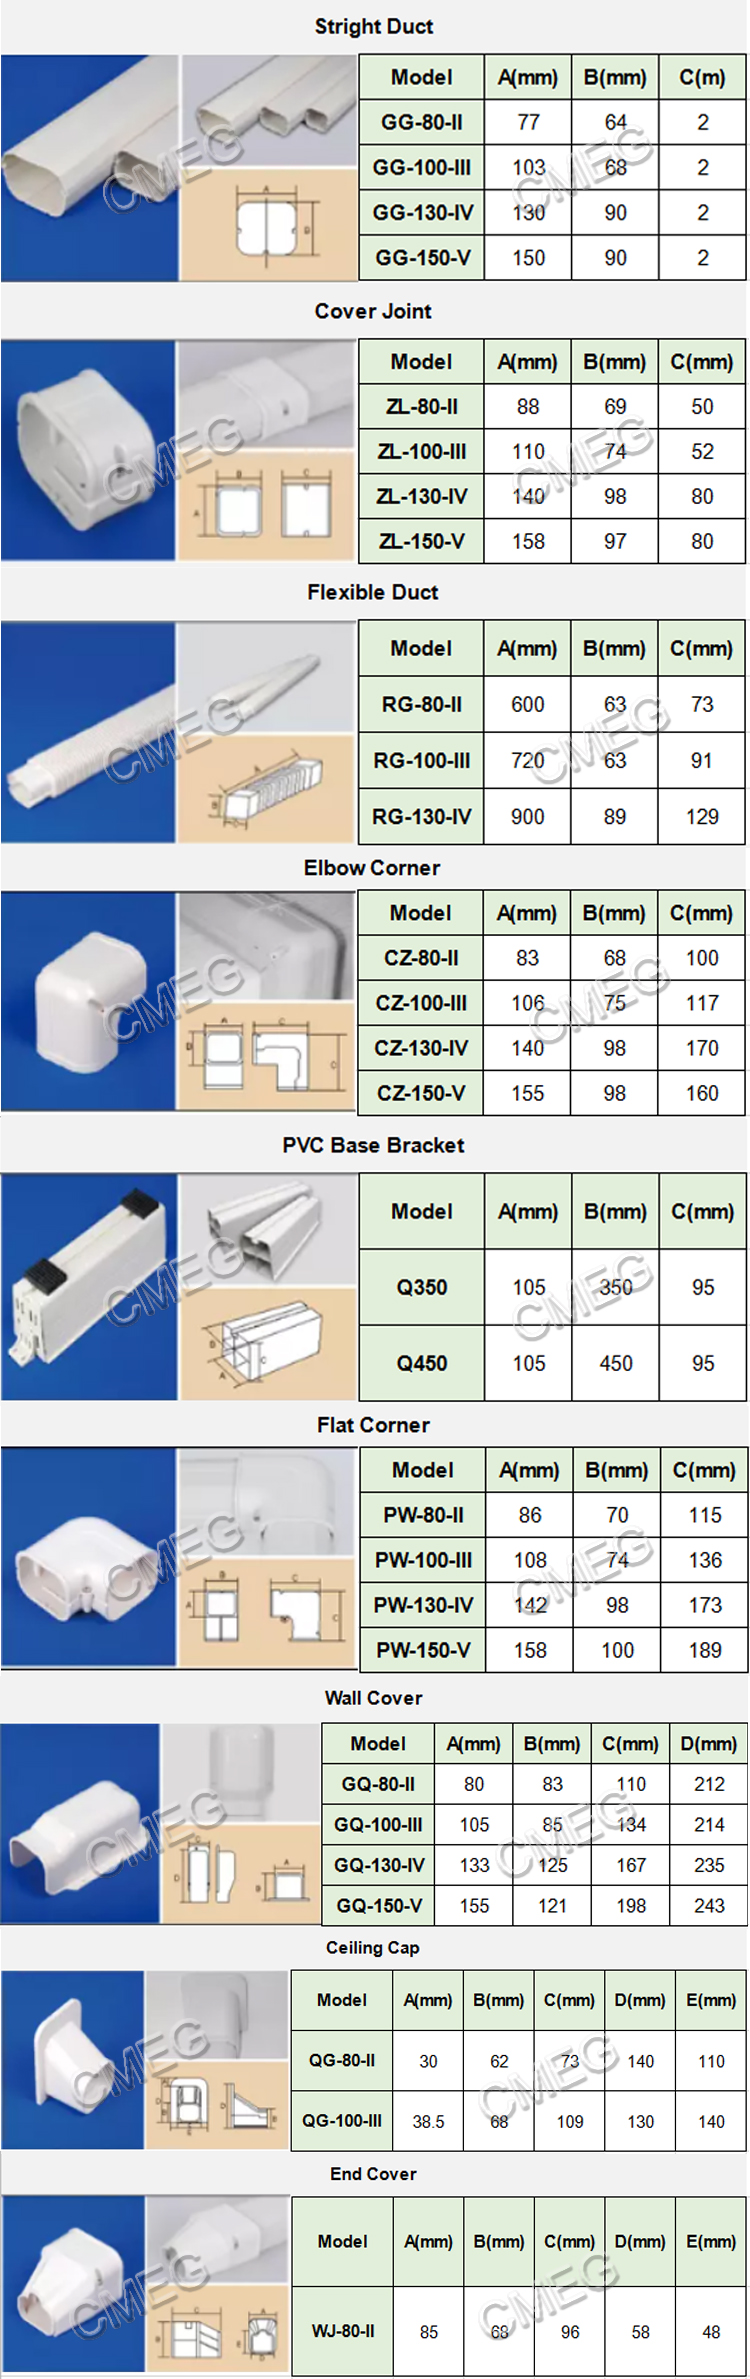 pvc cover specification.jpg